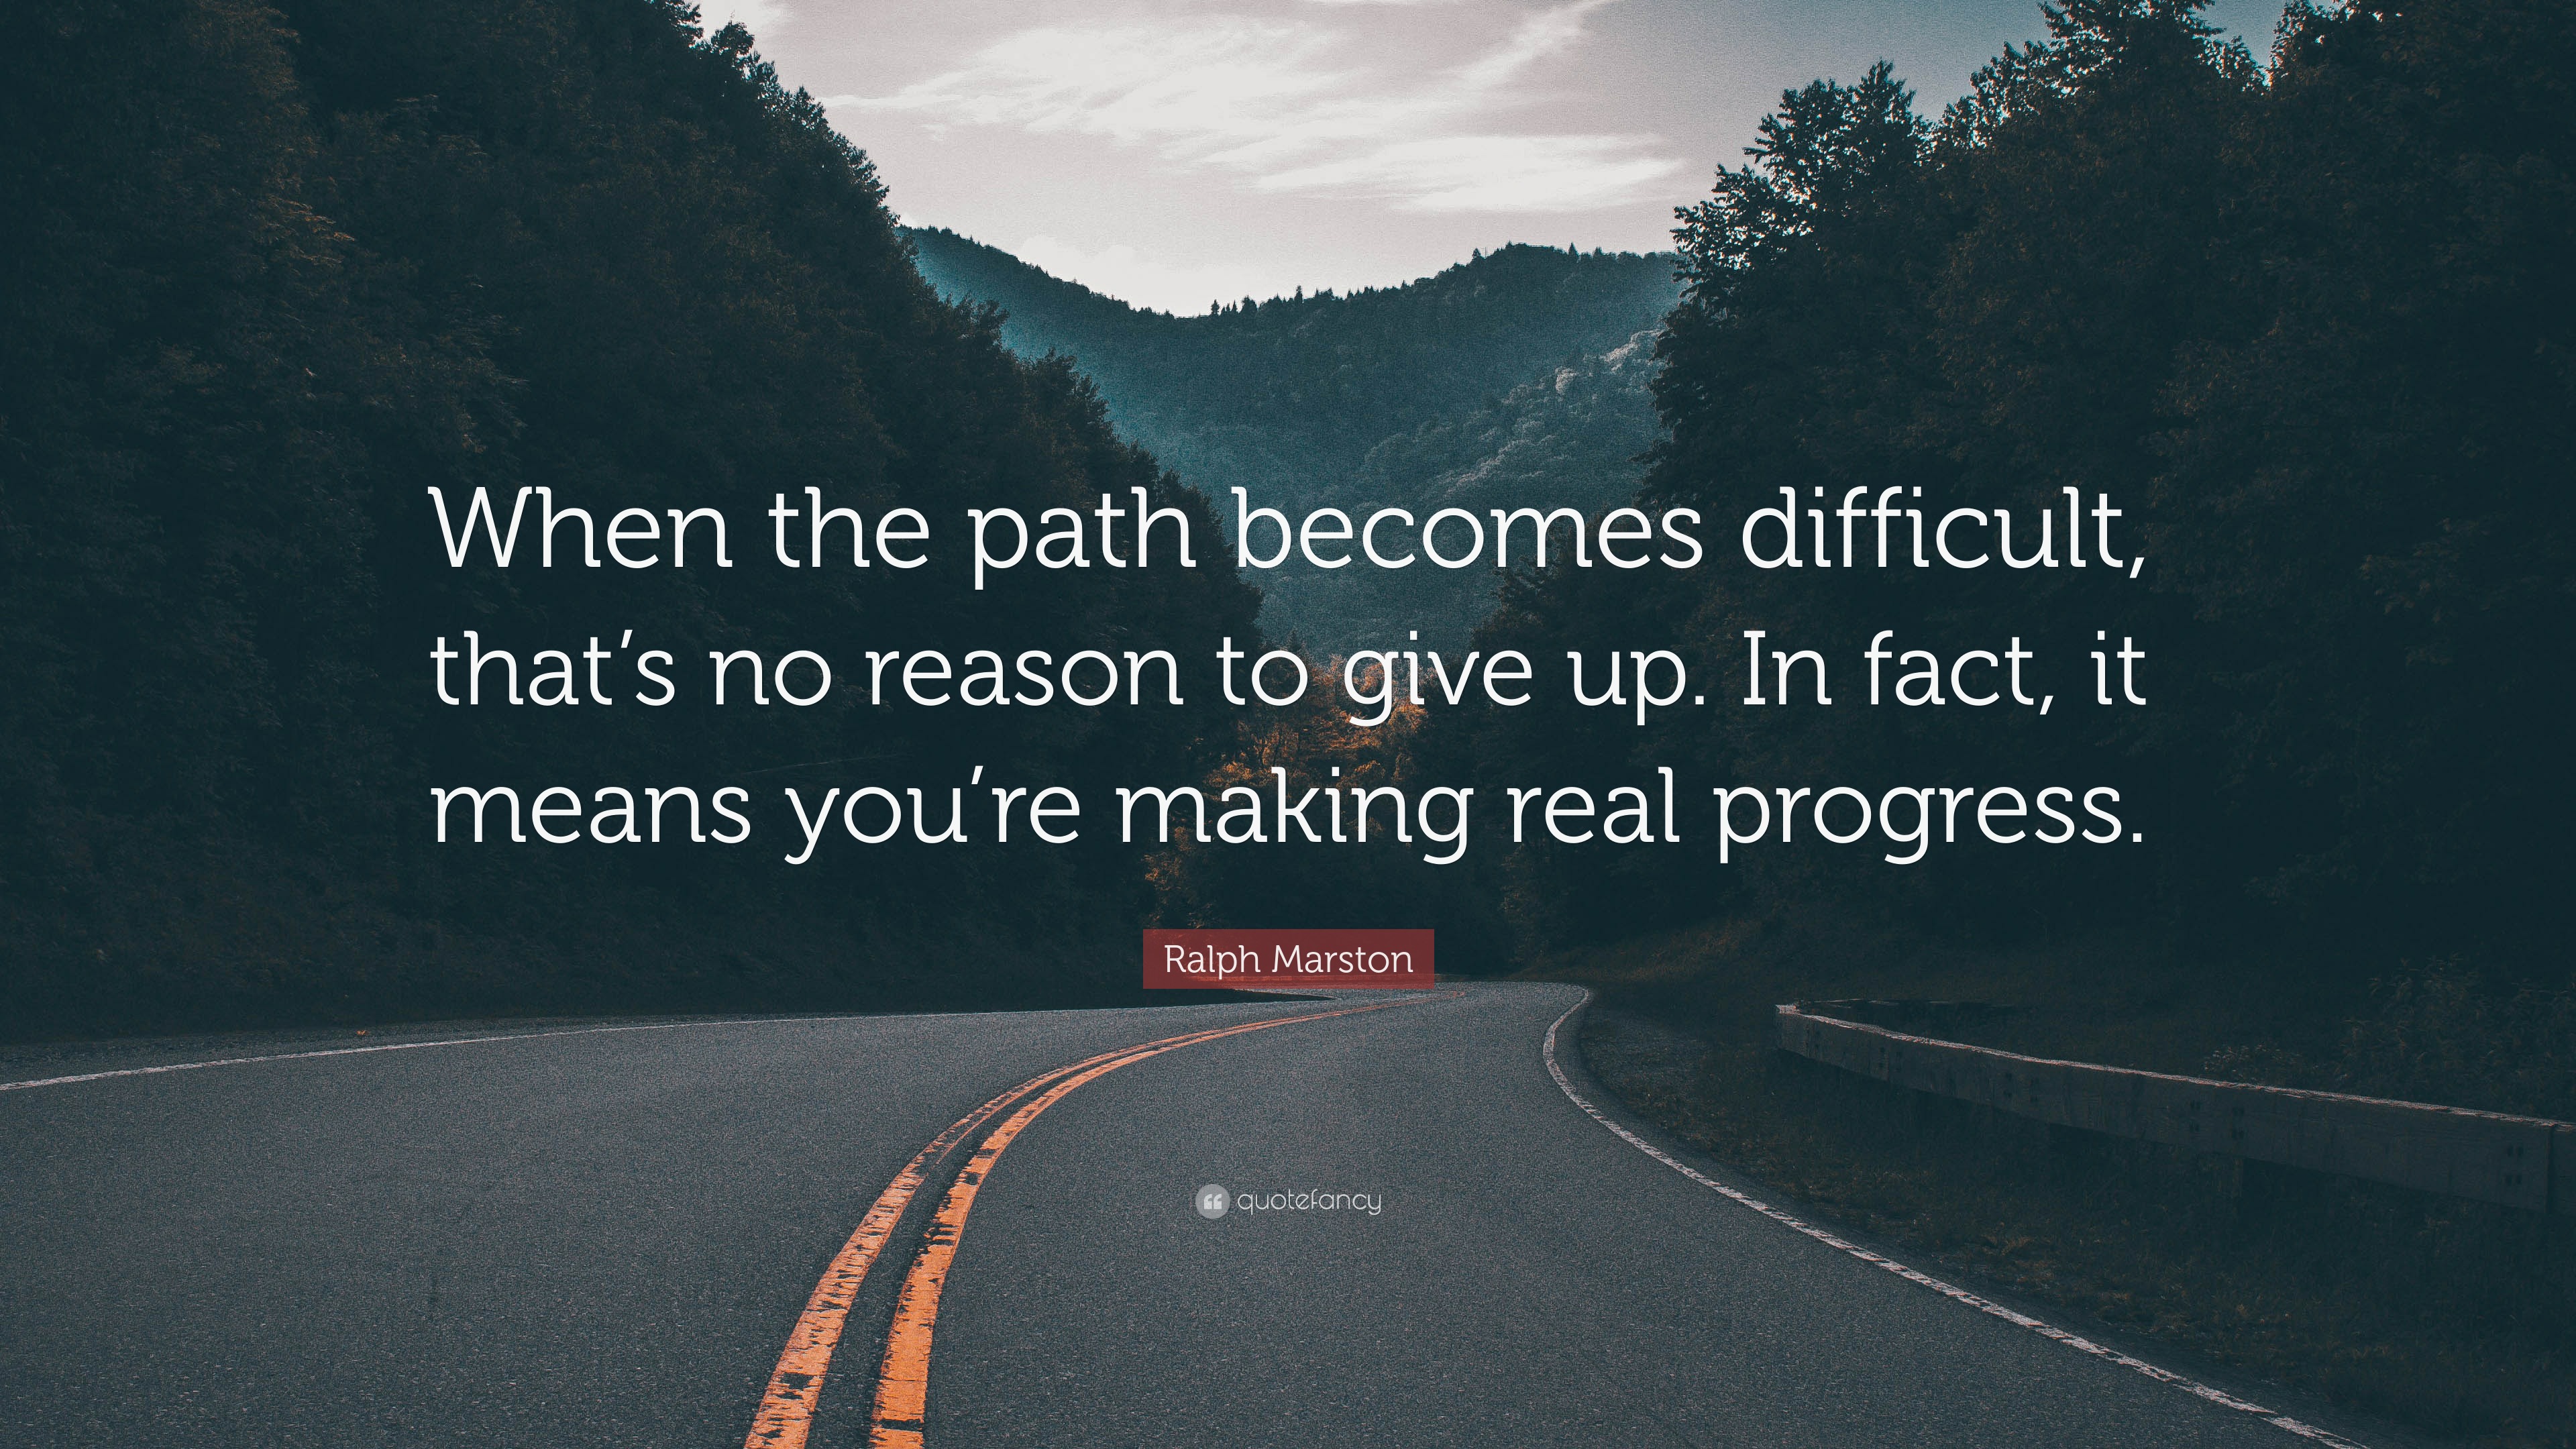 Ralph Marston Quote: “When the path becomes difficult, that’s no reason ...